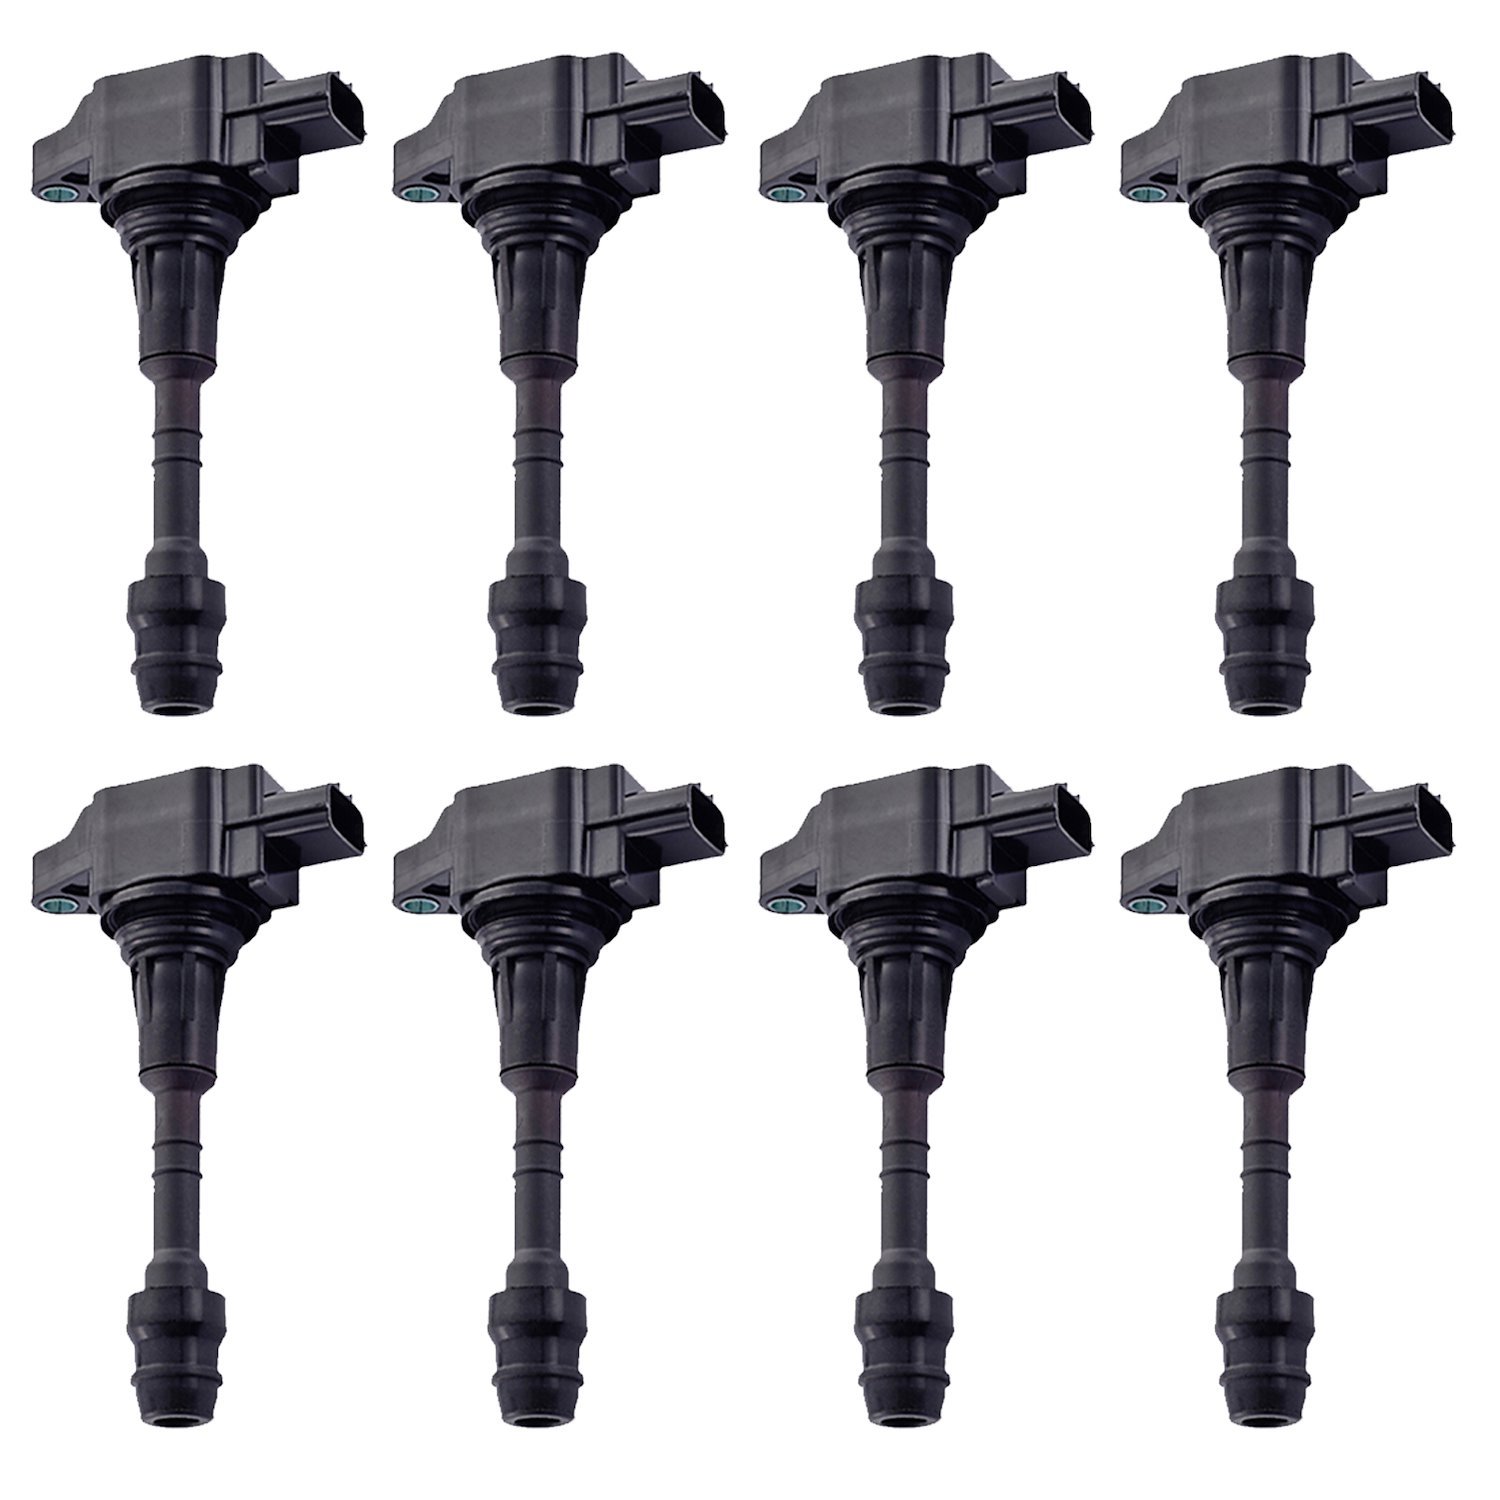 OE Replacement Ignition Coils for Infiniti QX56 Nissan Armada Titan Pathfinder